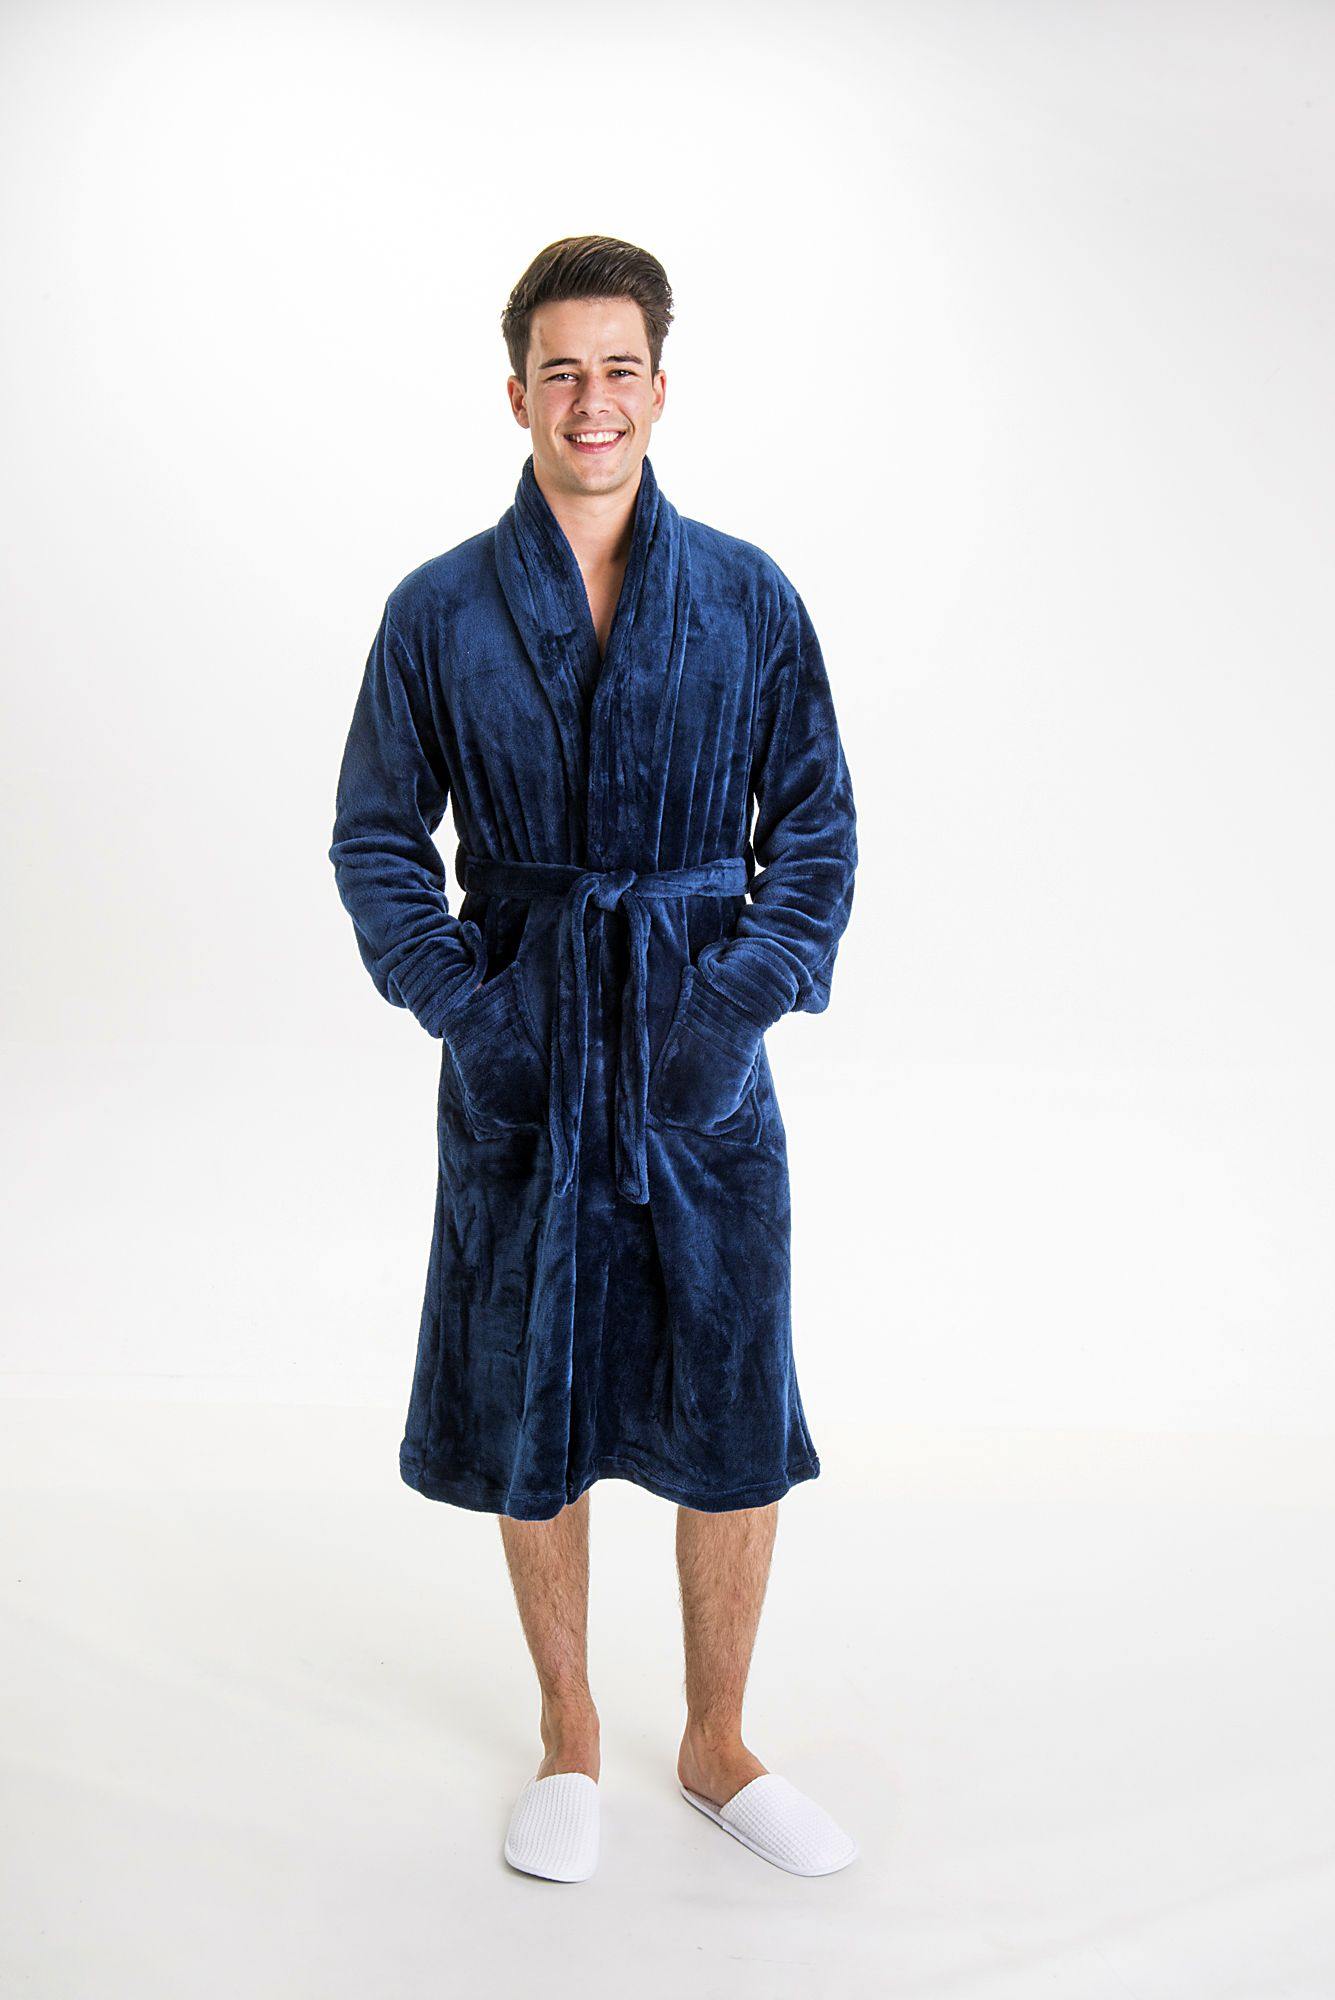 Personlised Fathers Day Hamper - Robes 4 You